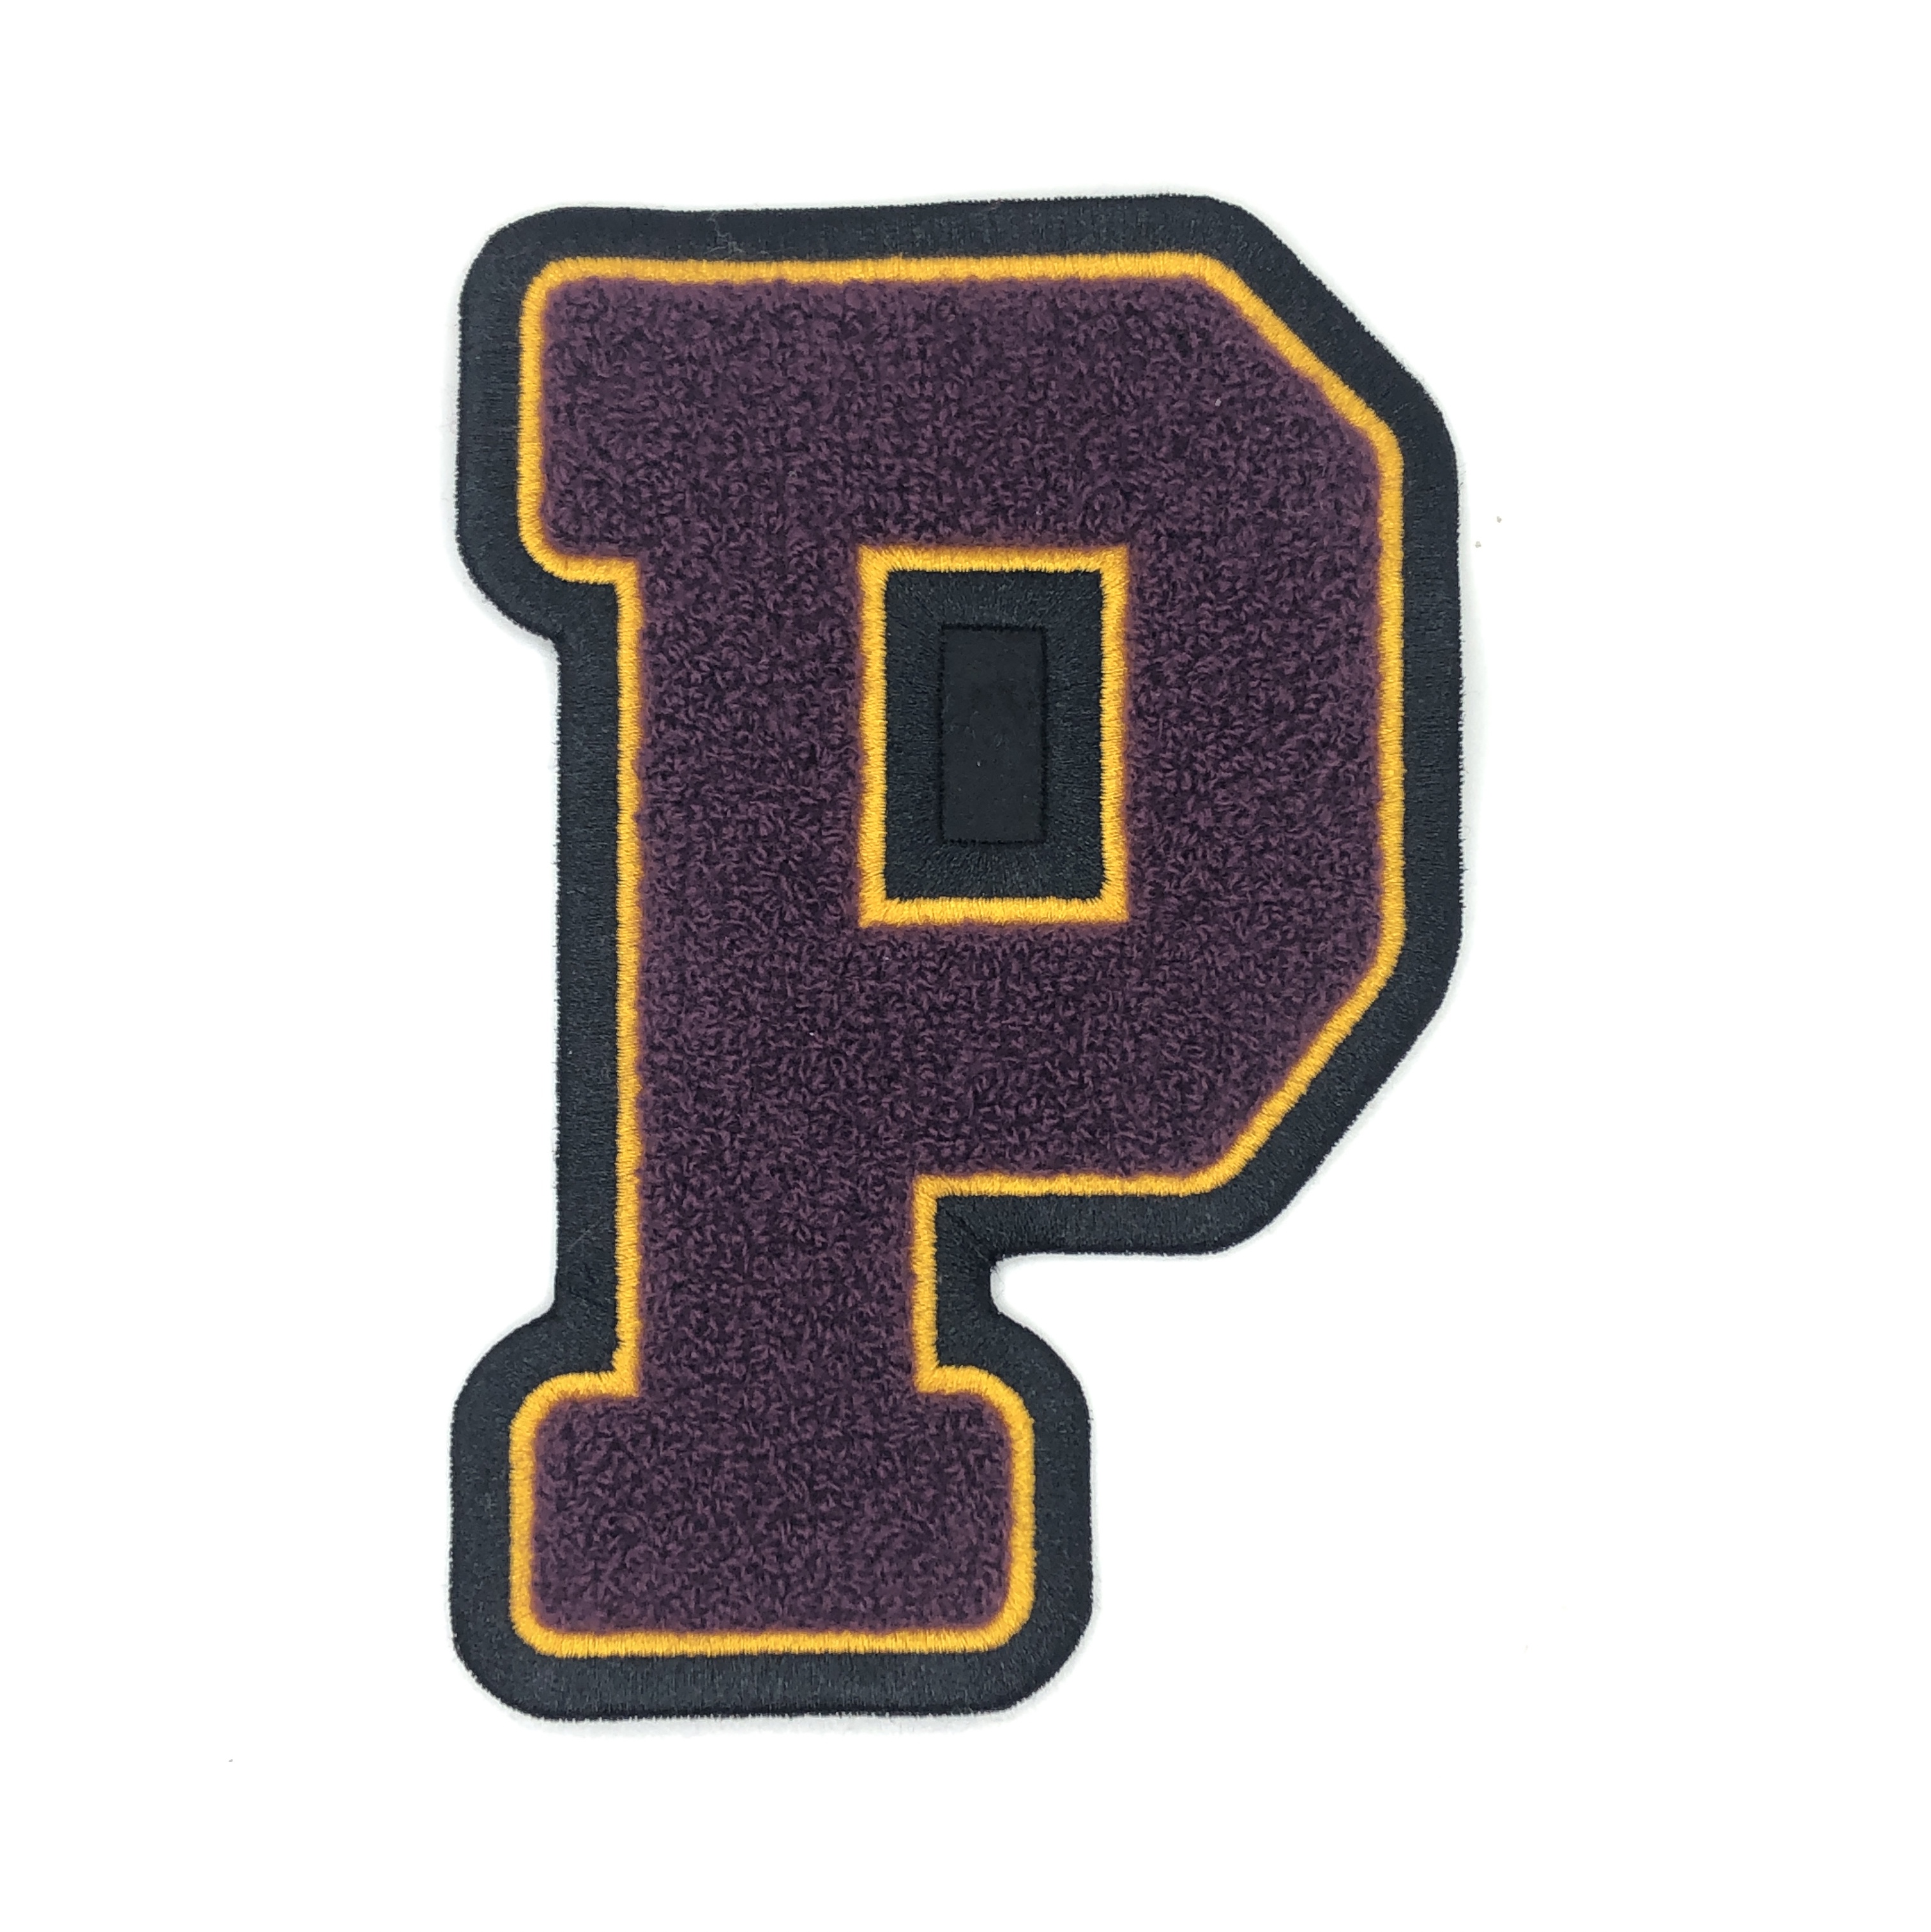 custom made chenille patch with an embroidered border around the felt